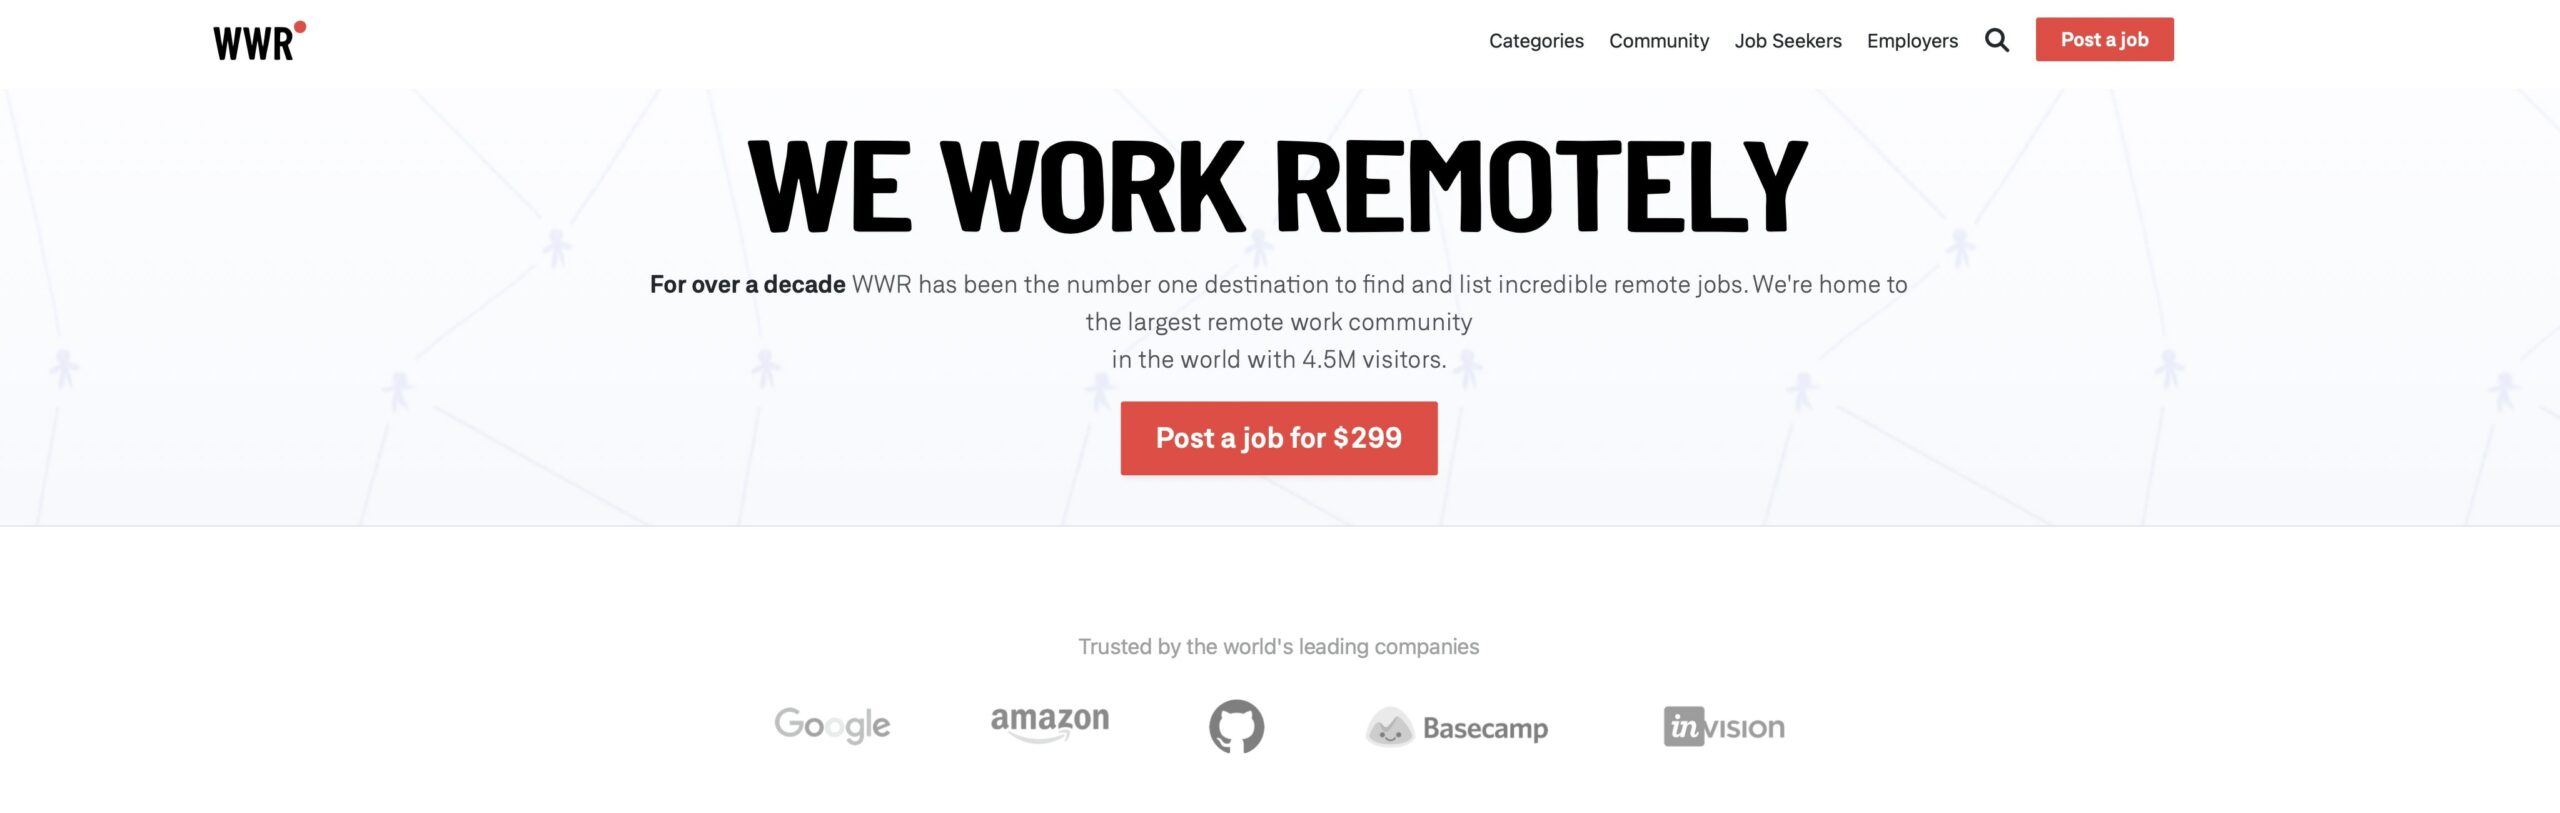 We Work Remotely Website Home Page